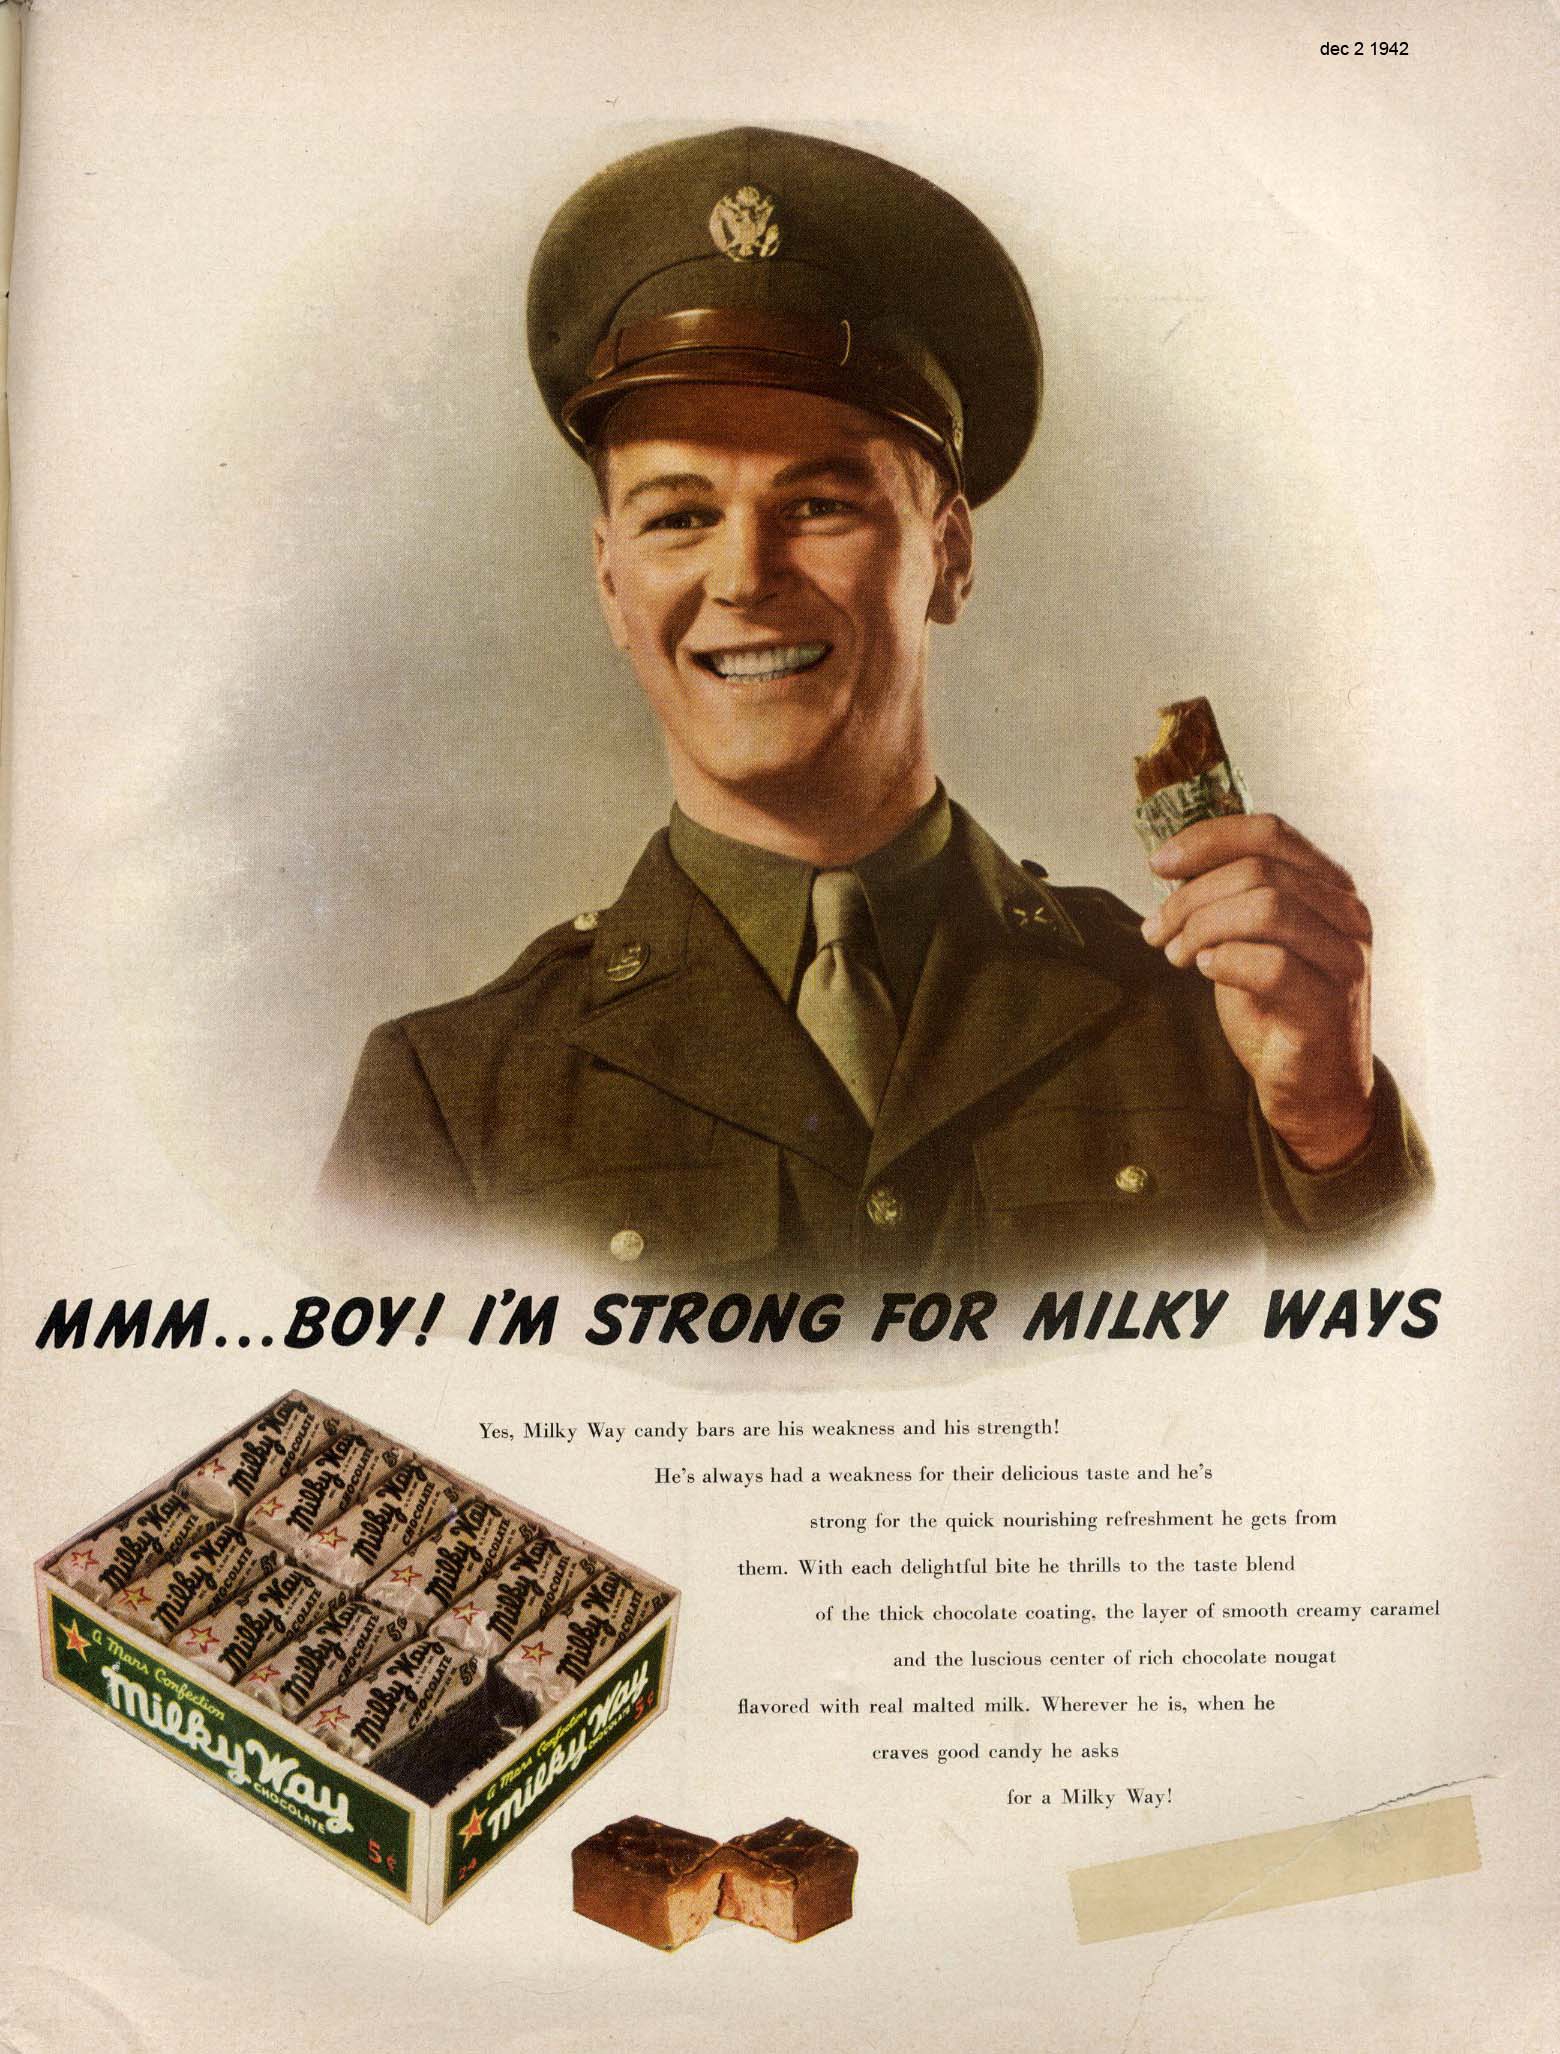 American Advertising and War, Gallery 3 1939-1942